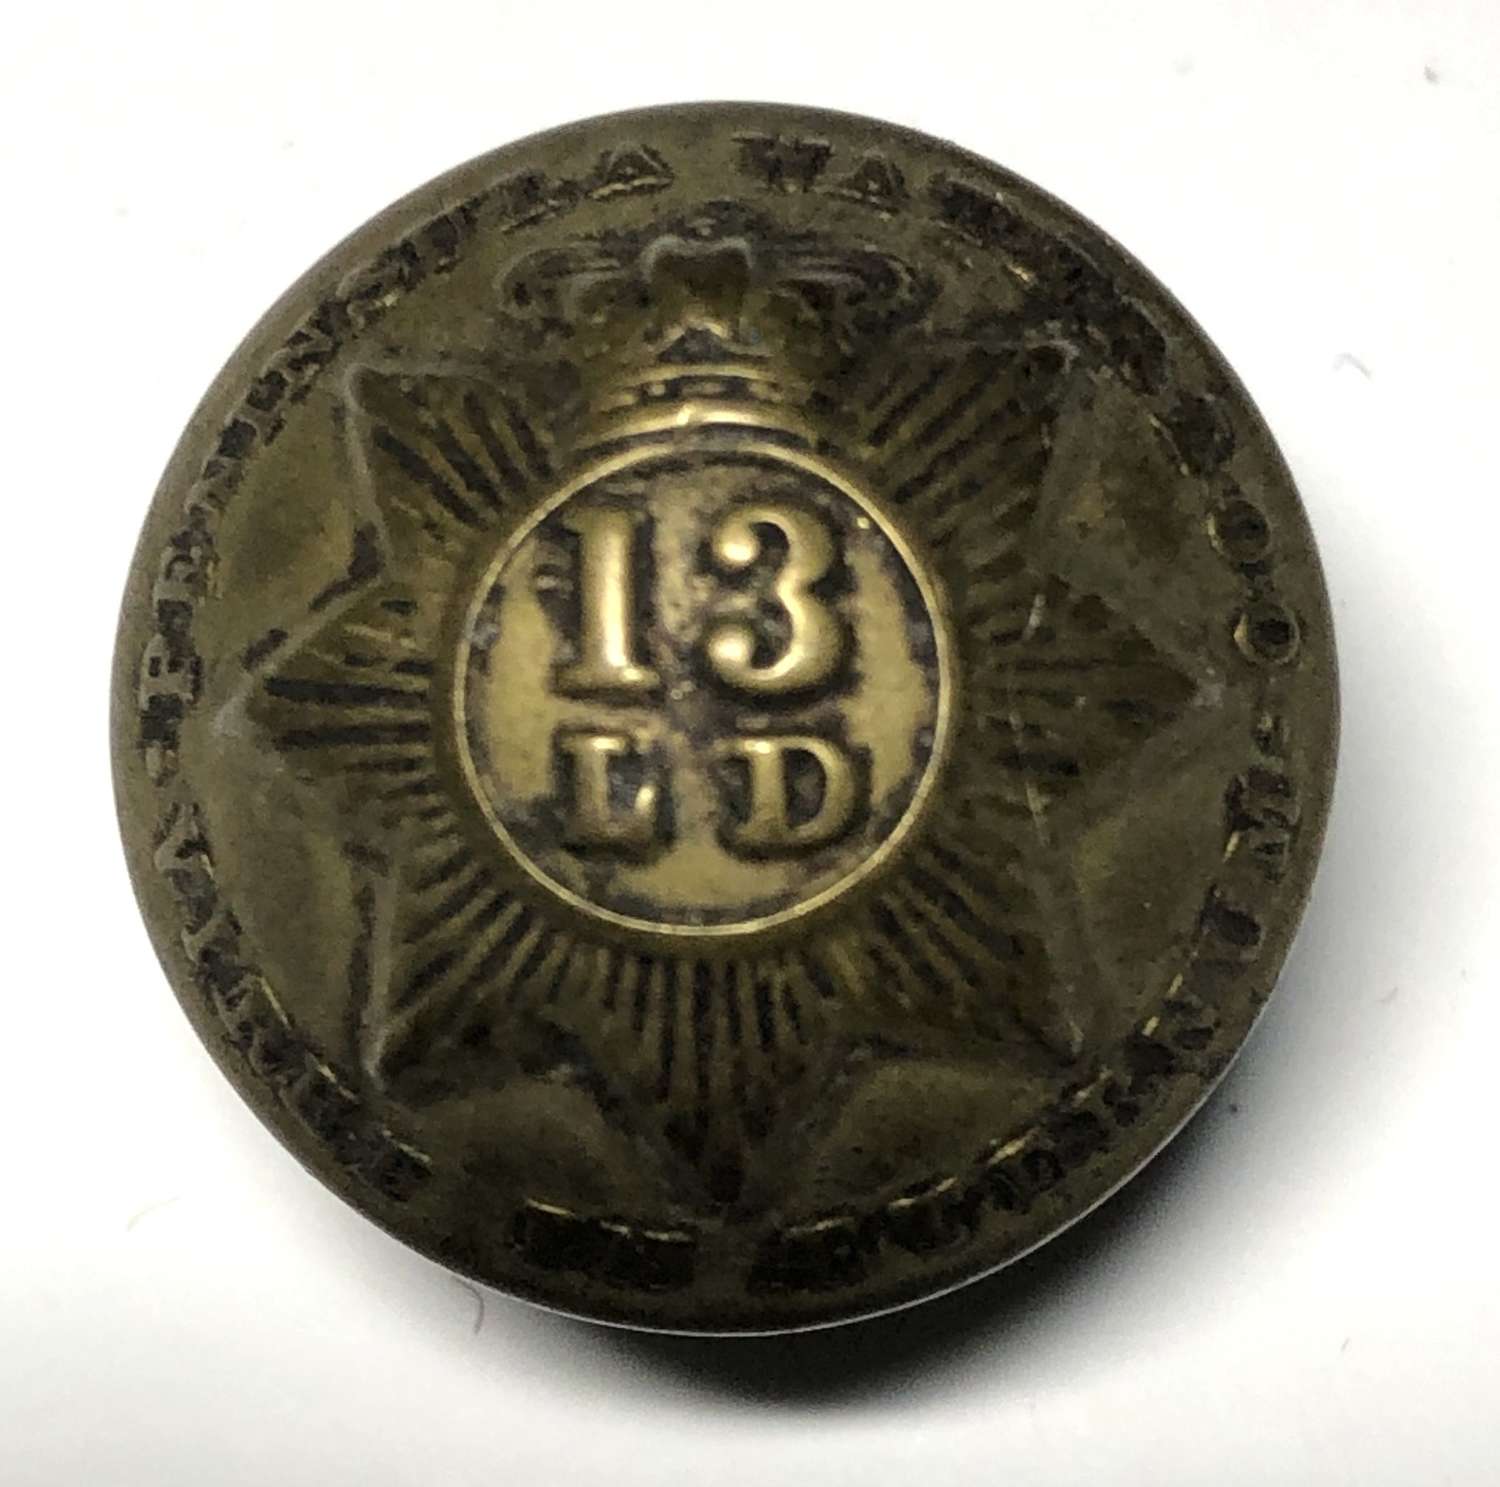 13th Light Dragoons Victorian button C1855-61 by Clark & Stephens